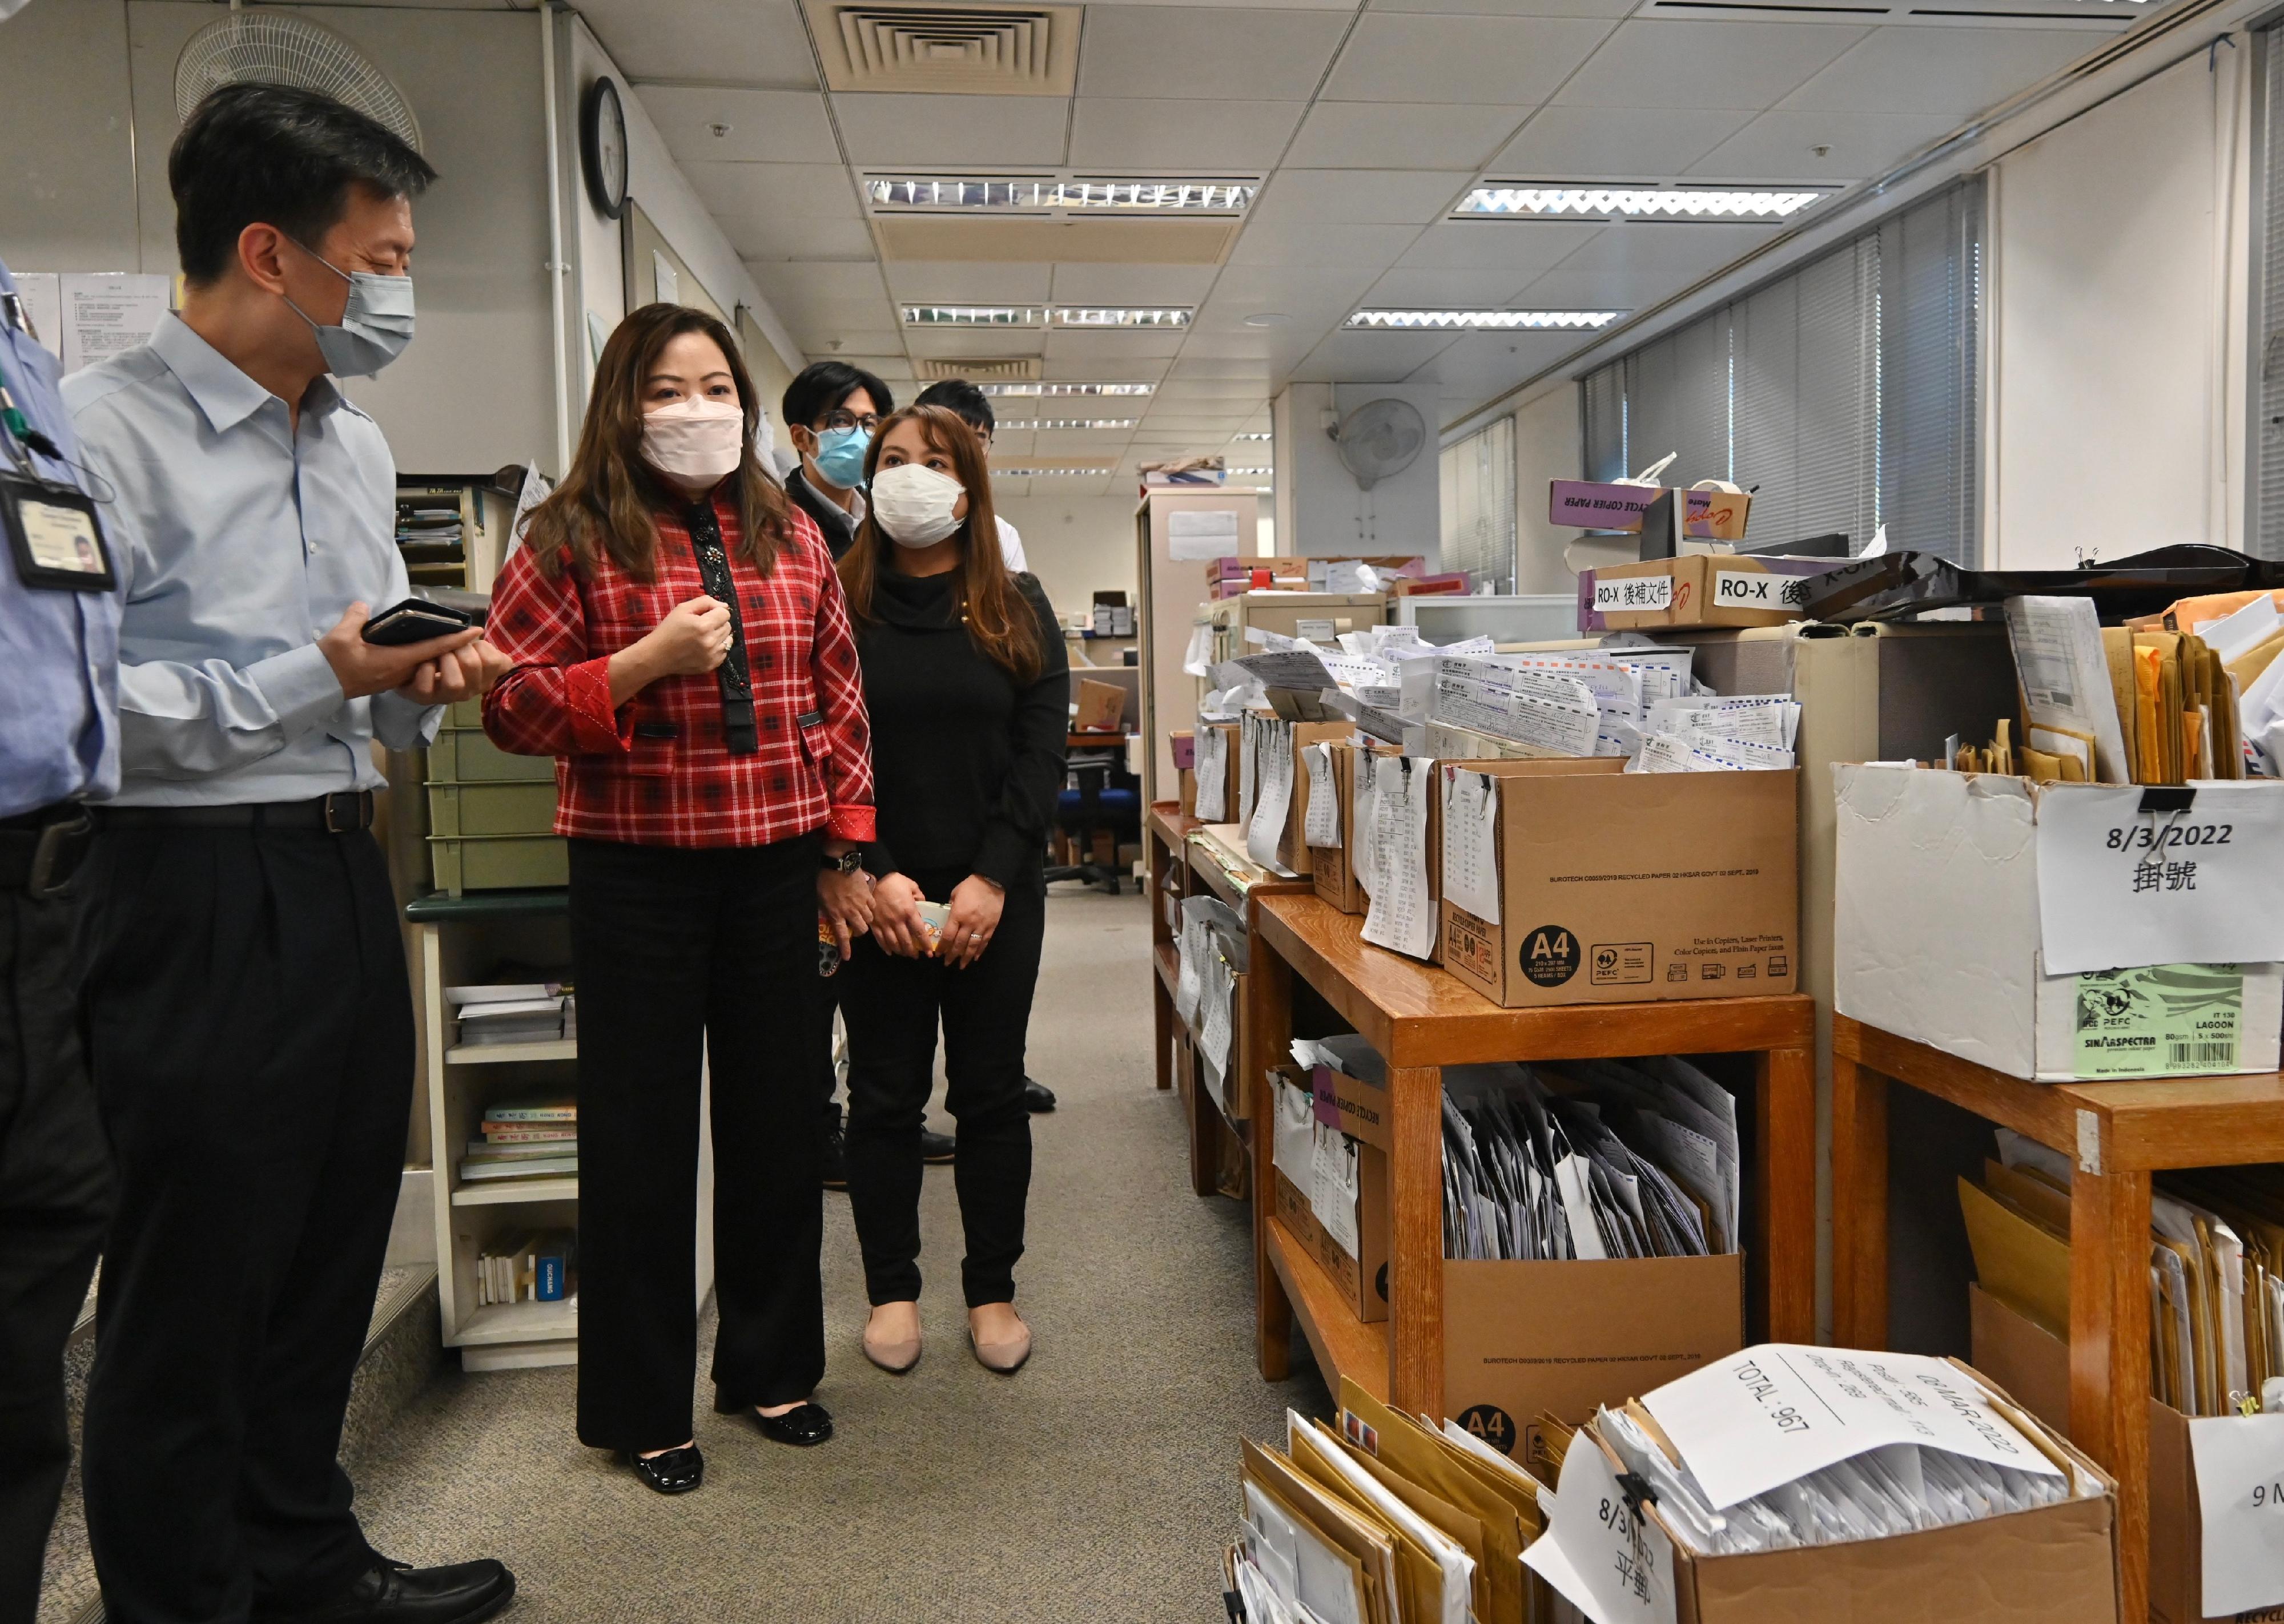 The Commissioner for Transport, Miss Rosanna Law (second left), visits the Sha Tin Licensing Office today (March 10) to learn more about the provision of services by frontline colleagues during the epidemic. Miss Law thanked colleagues for attending to their duties steadfastly and diligently with the severe epidemic and stringent manpower situation, and for striving to maintain services.  